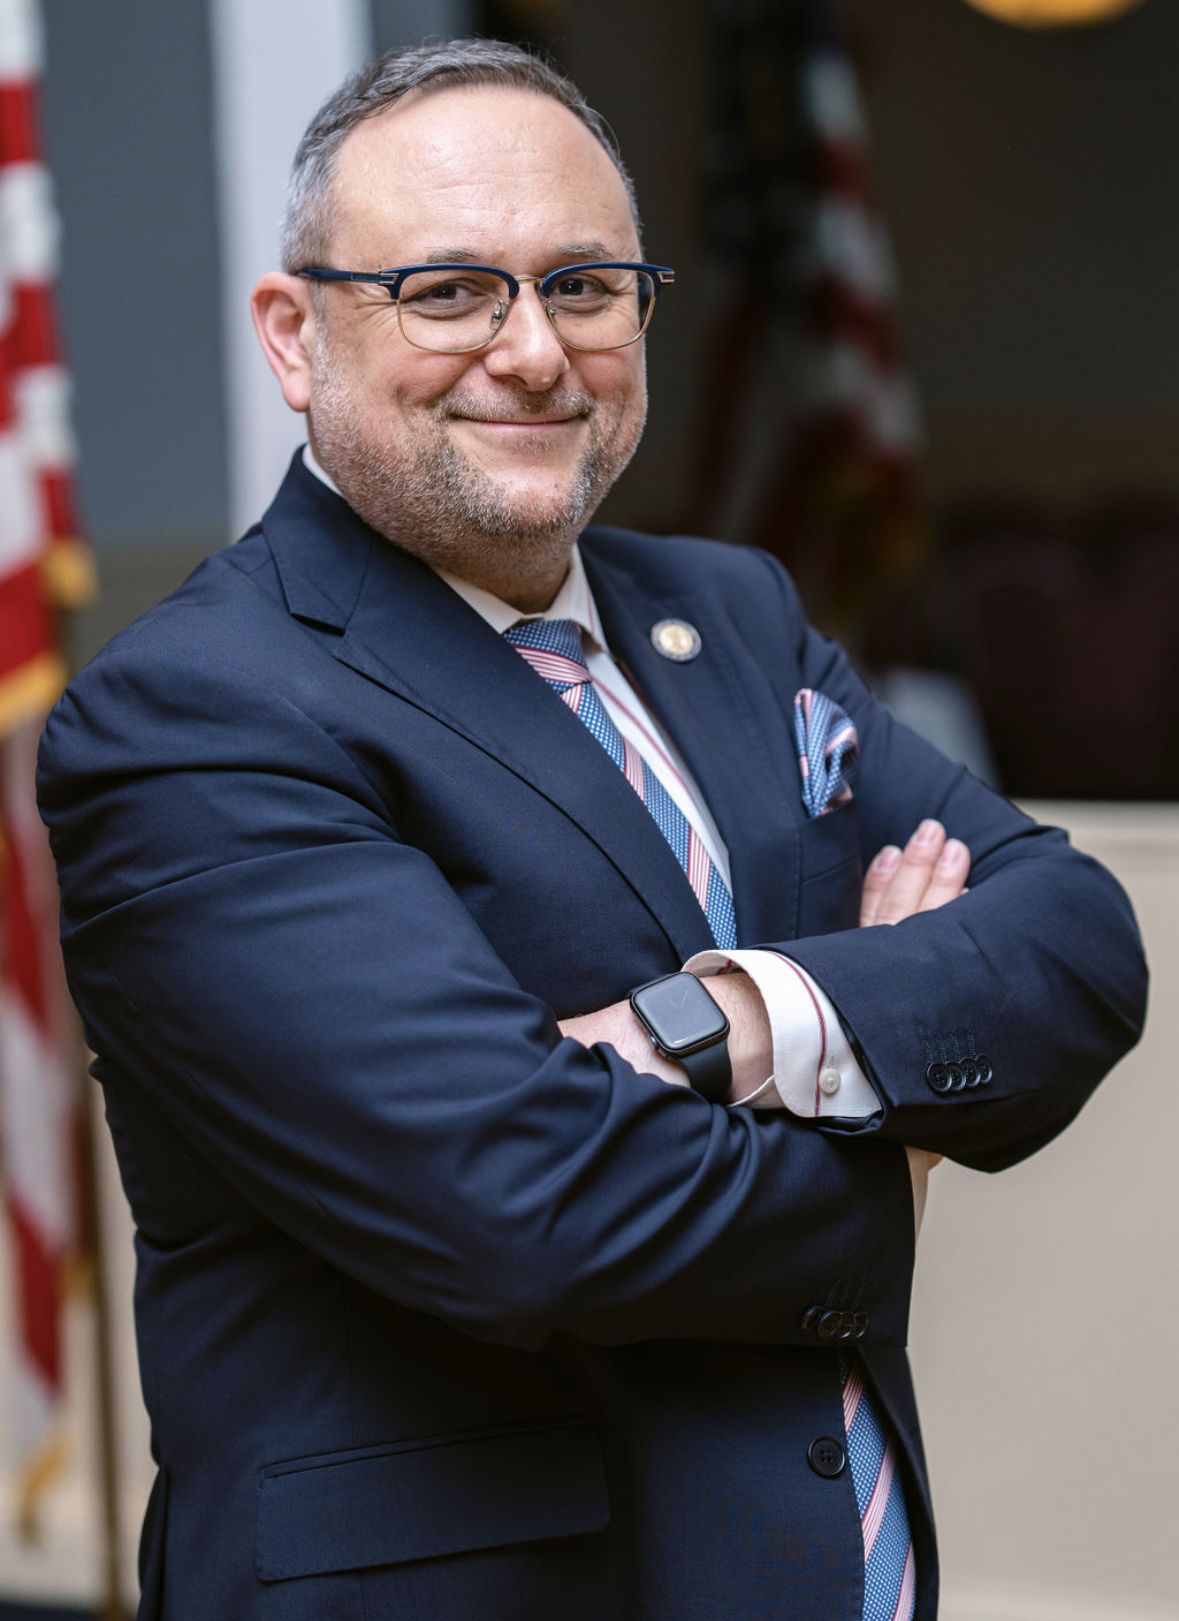 Standing Committee on  Housing Chair  Steven Cymbrowitz